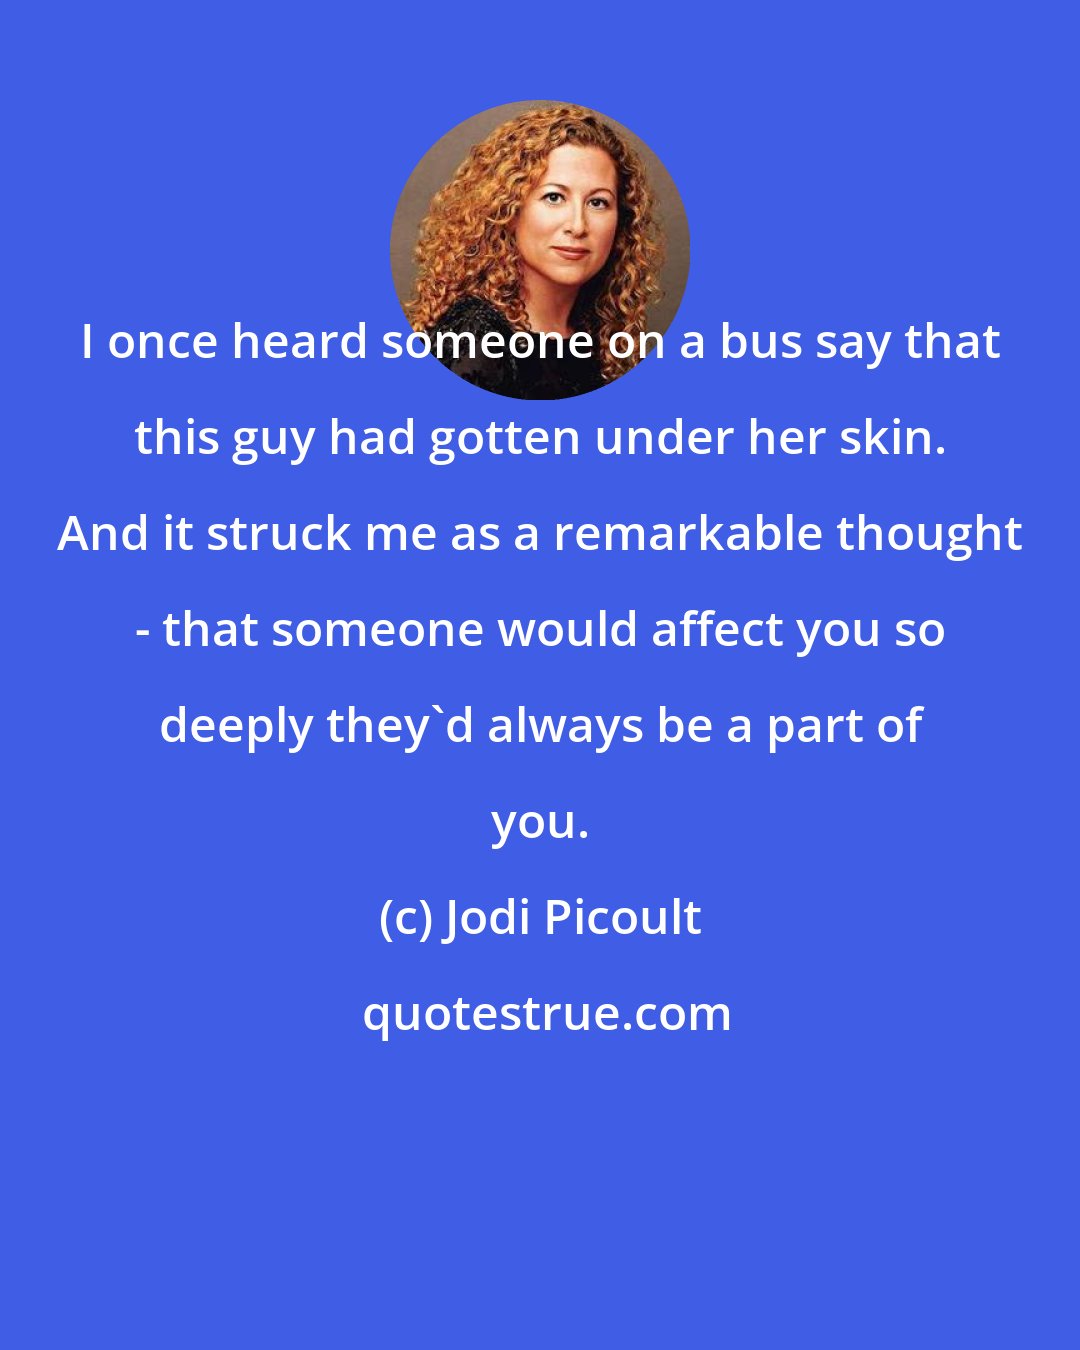 Jodi Picoult: I once heard someone on a bus say that this guy had gotten under her skin. And it struck me as a remarkable thought - that someone would affect you so deeply they'd always be a part of you.